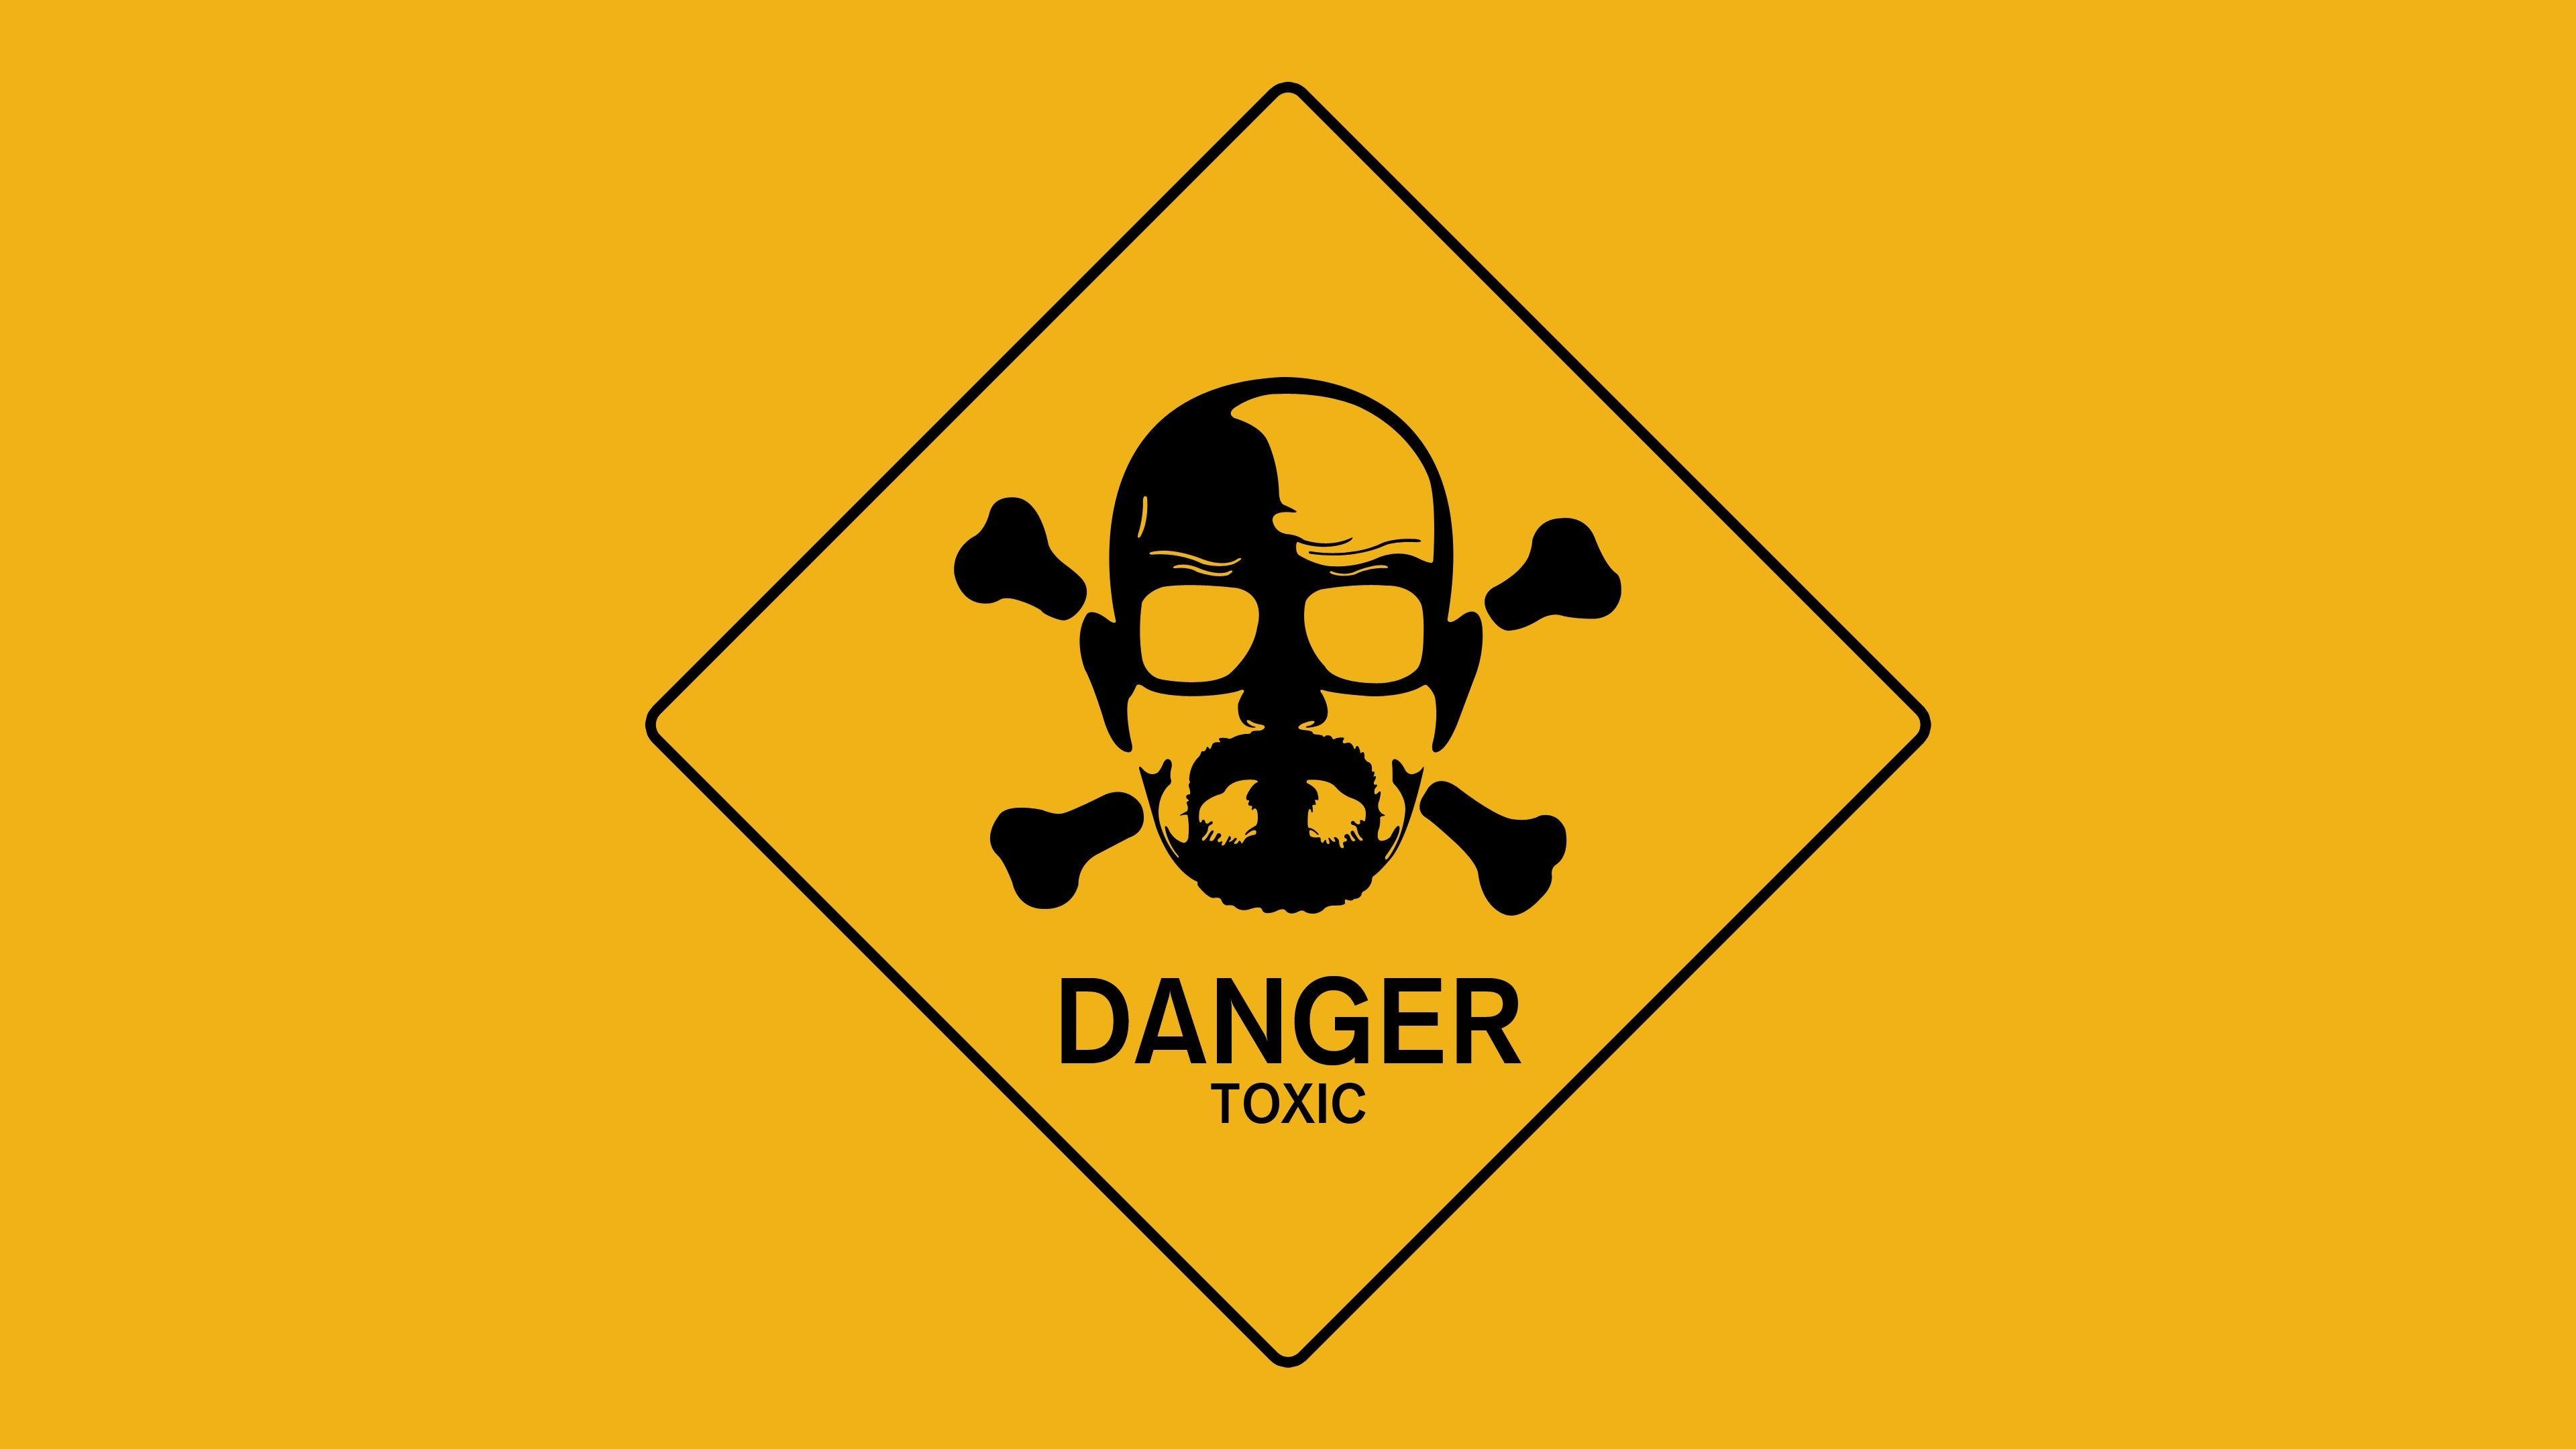 Danger signs wallpaper for free download about (13) wallpaper